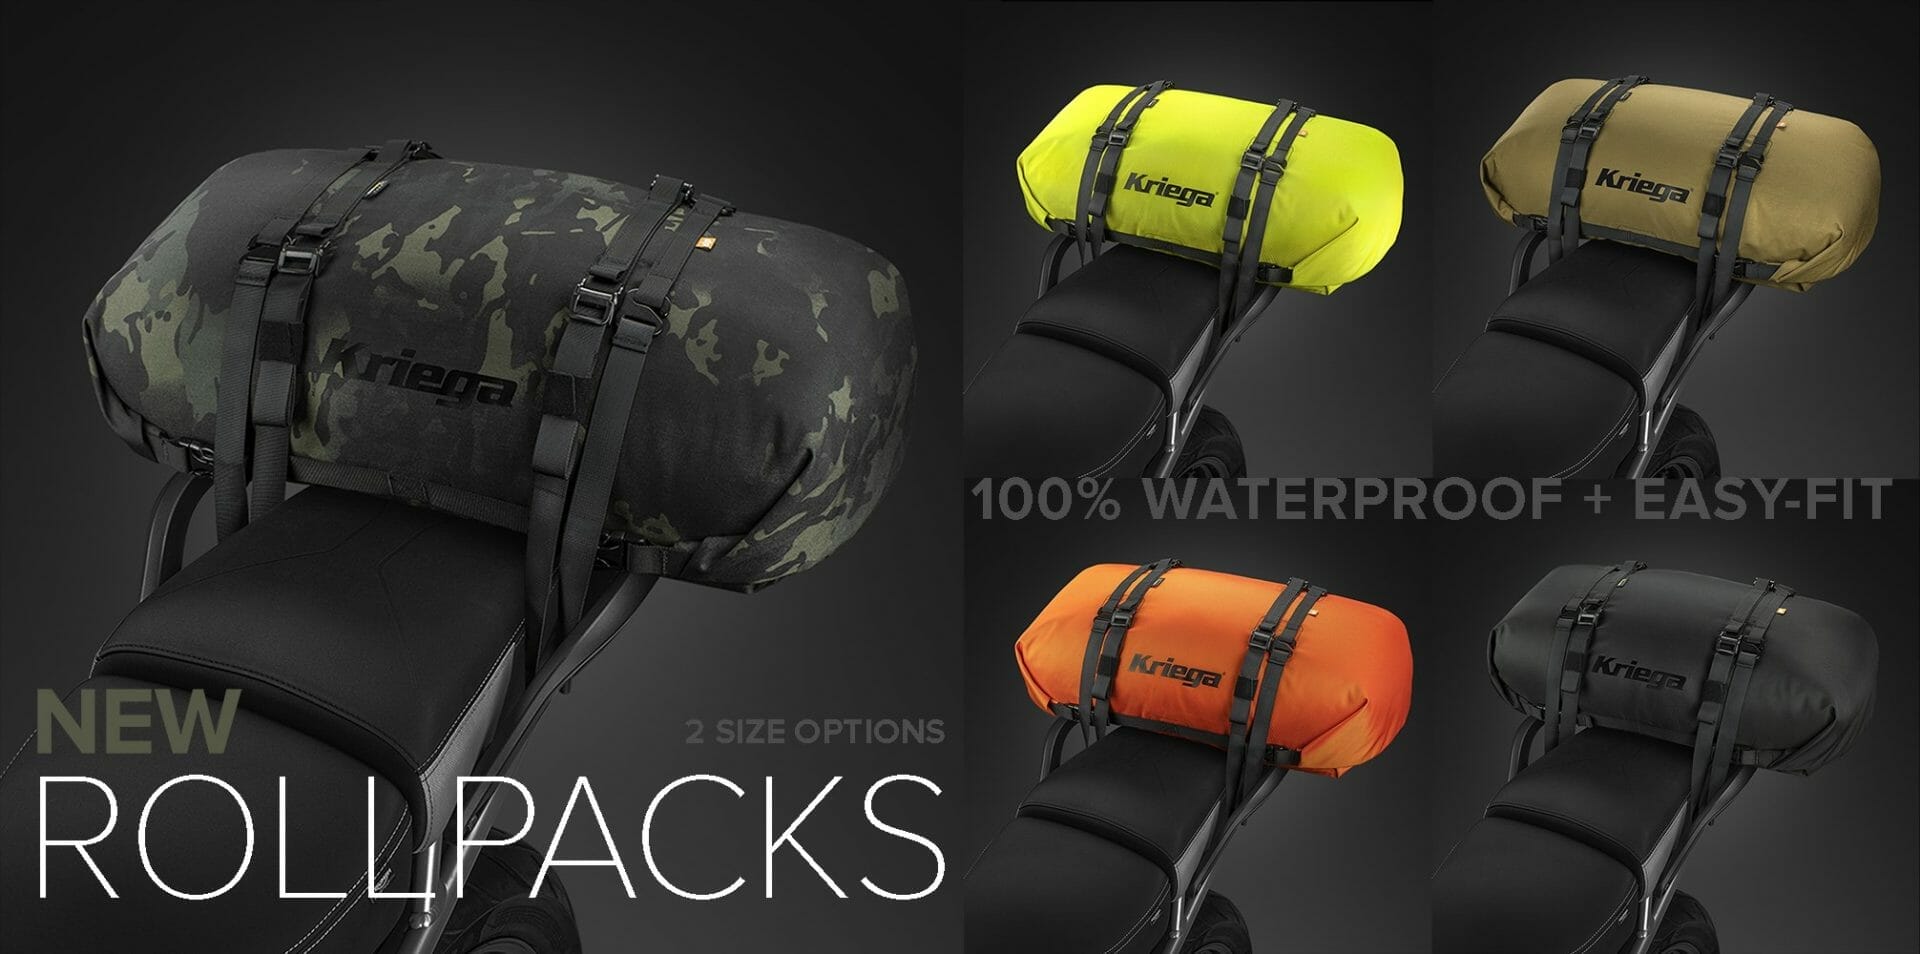 Introducing RollPack 20 & RollPack 40: New additions to Kriega’s waterproof motorcycle pack segment